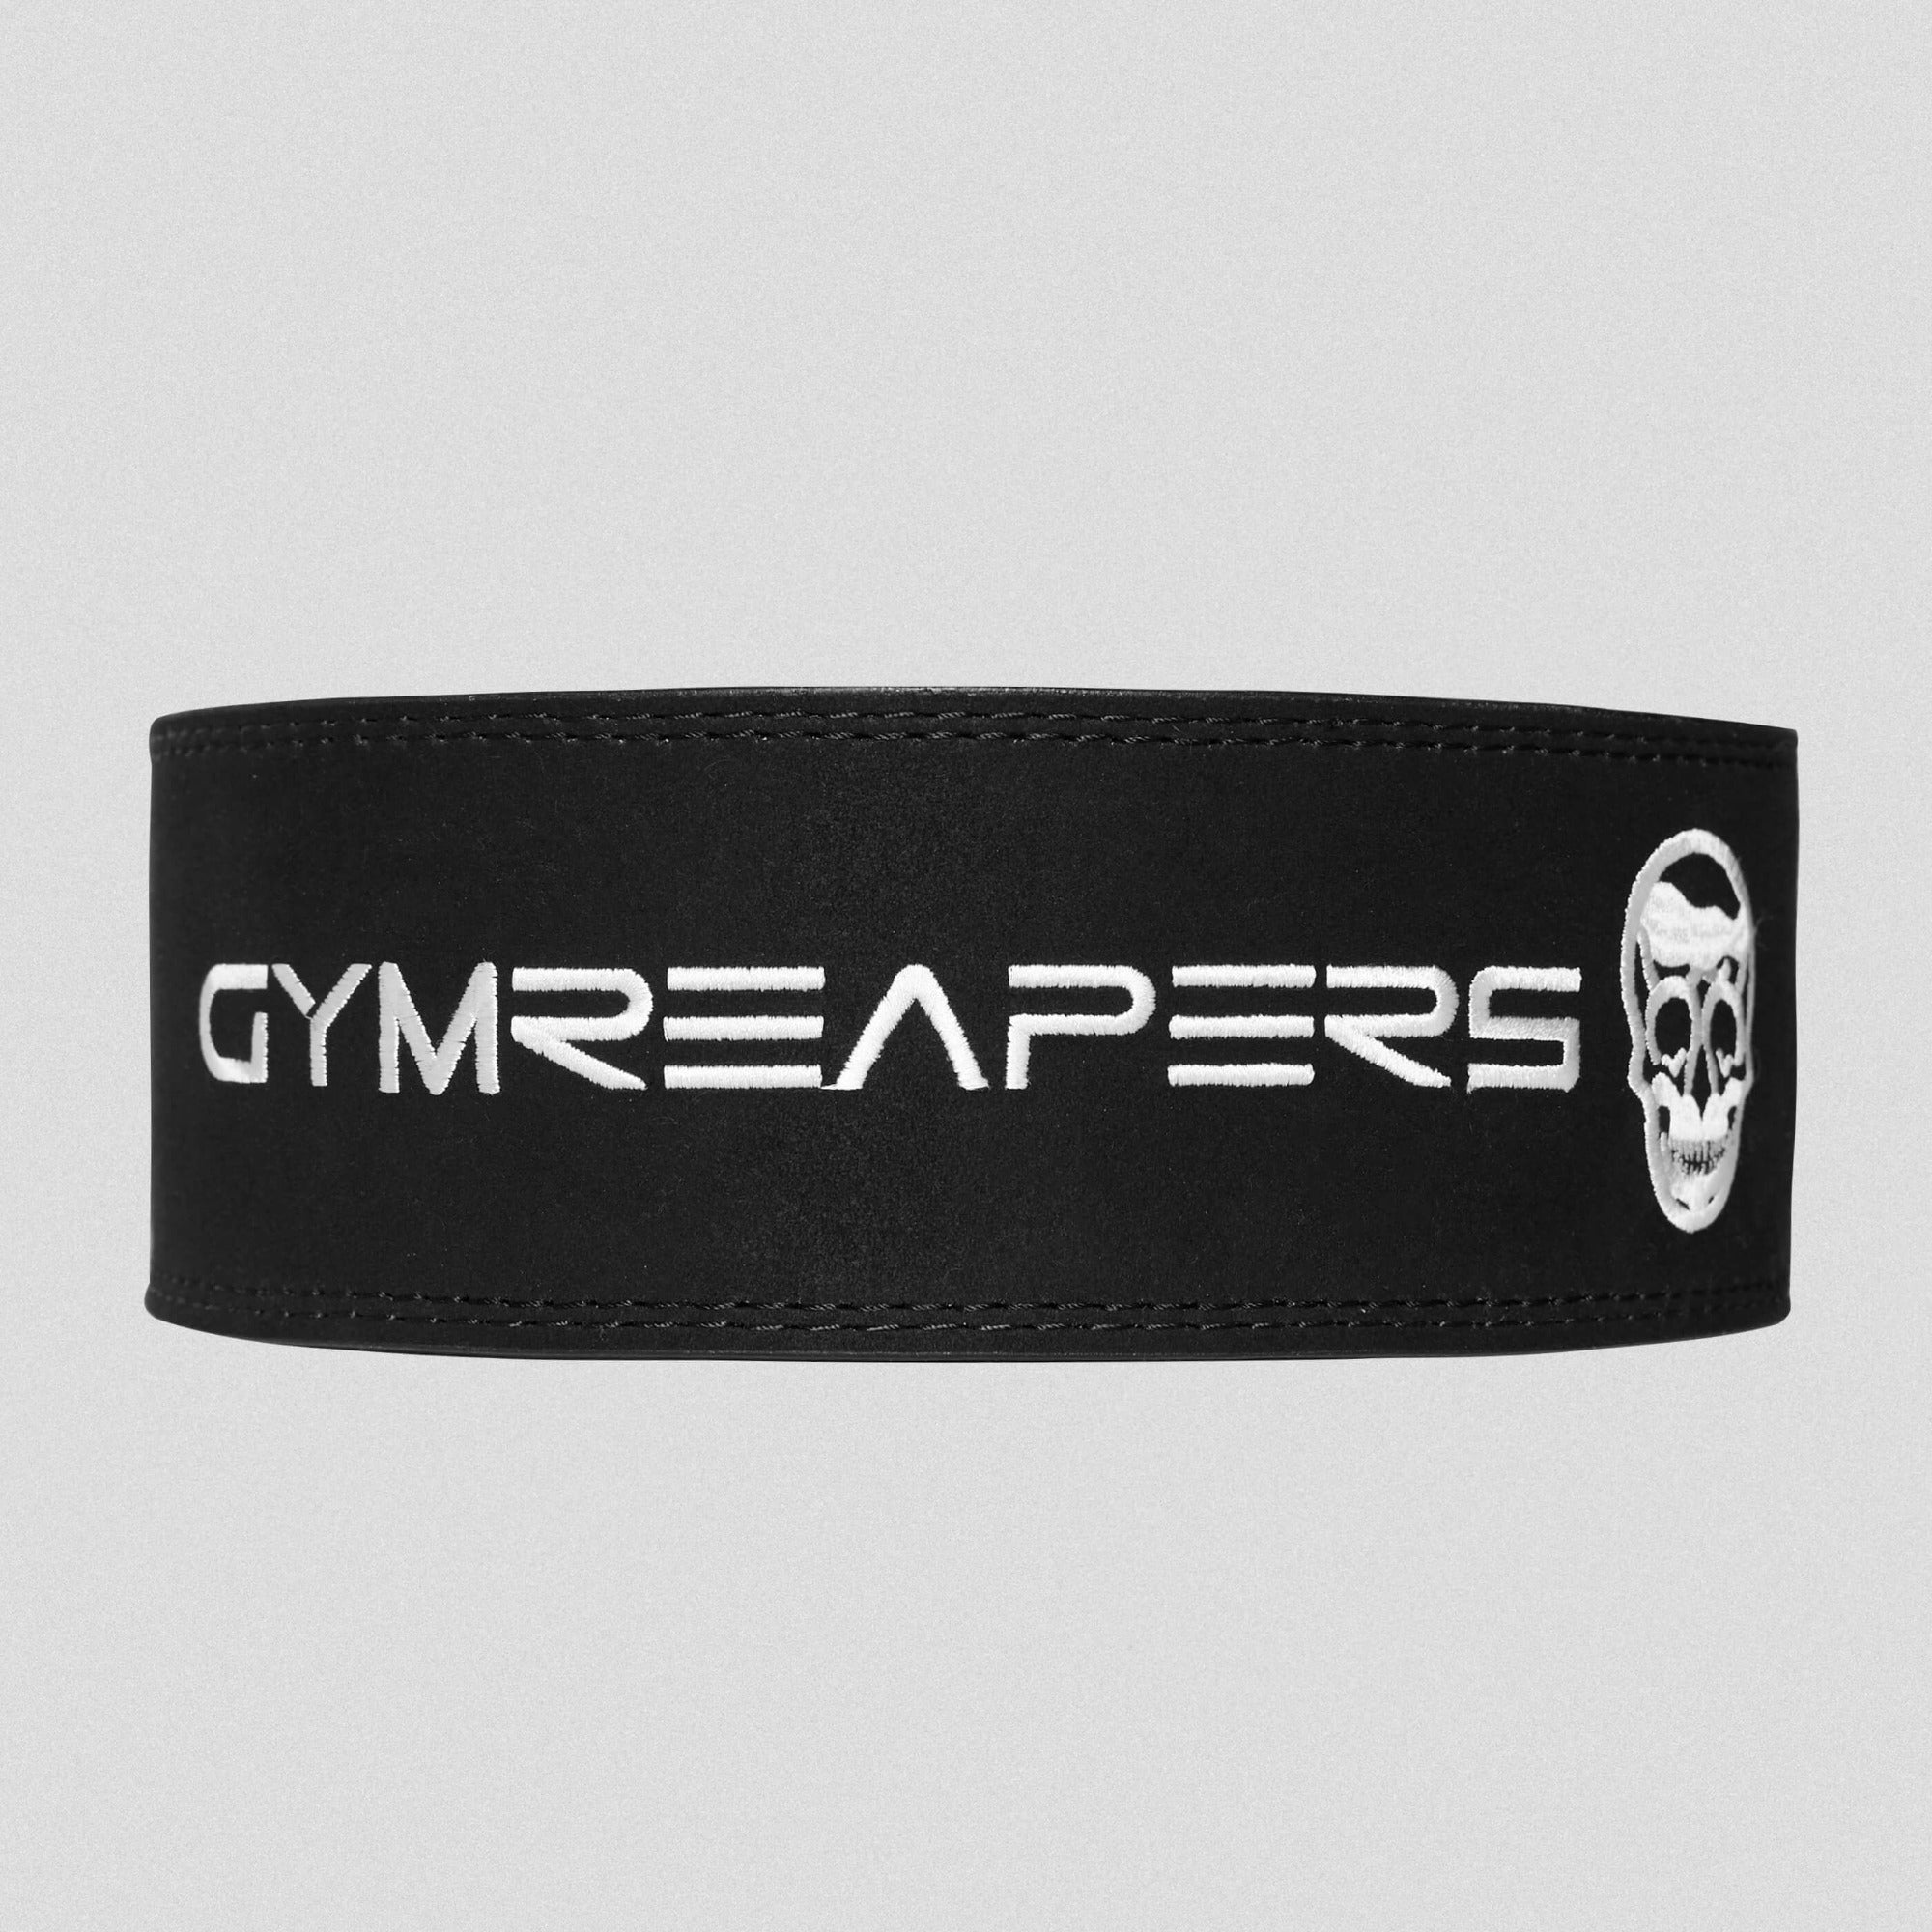  Gymreapers Leather Weightlifting Belt for